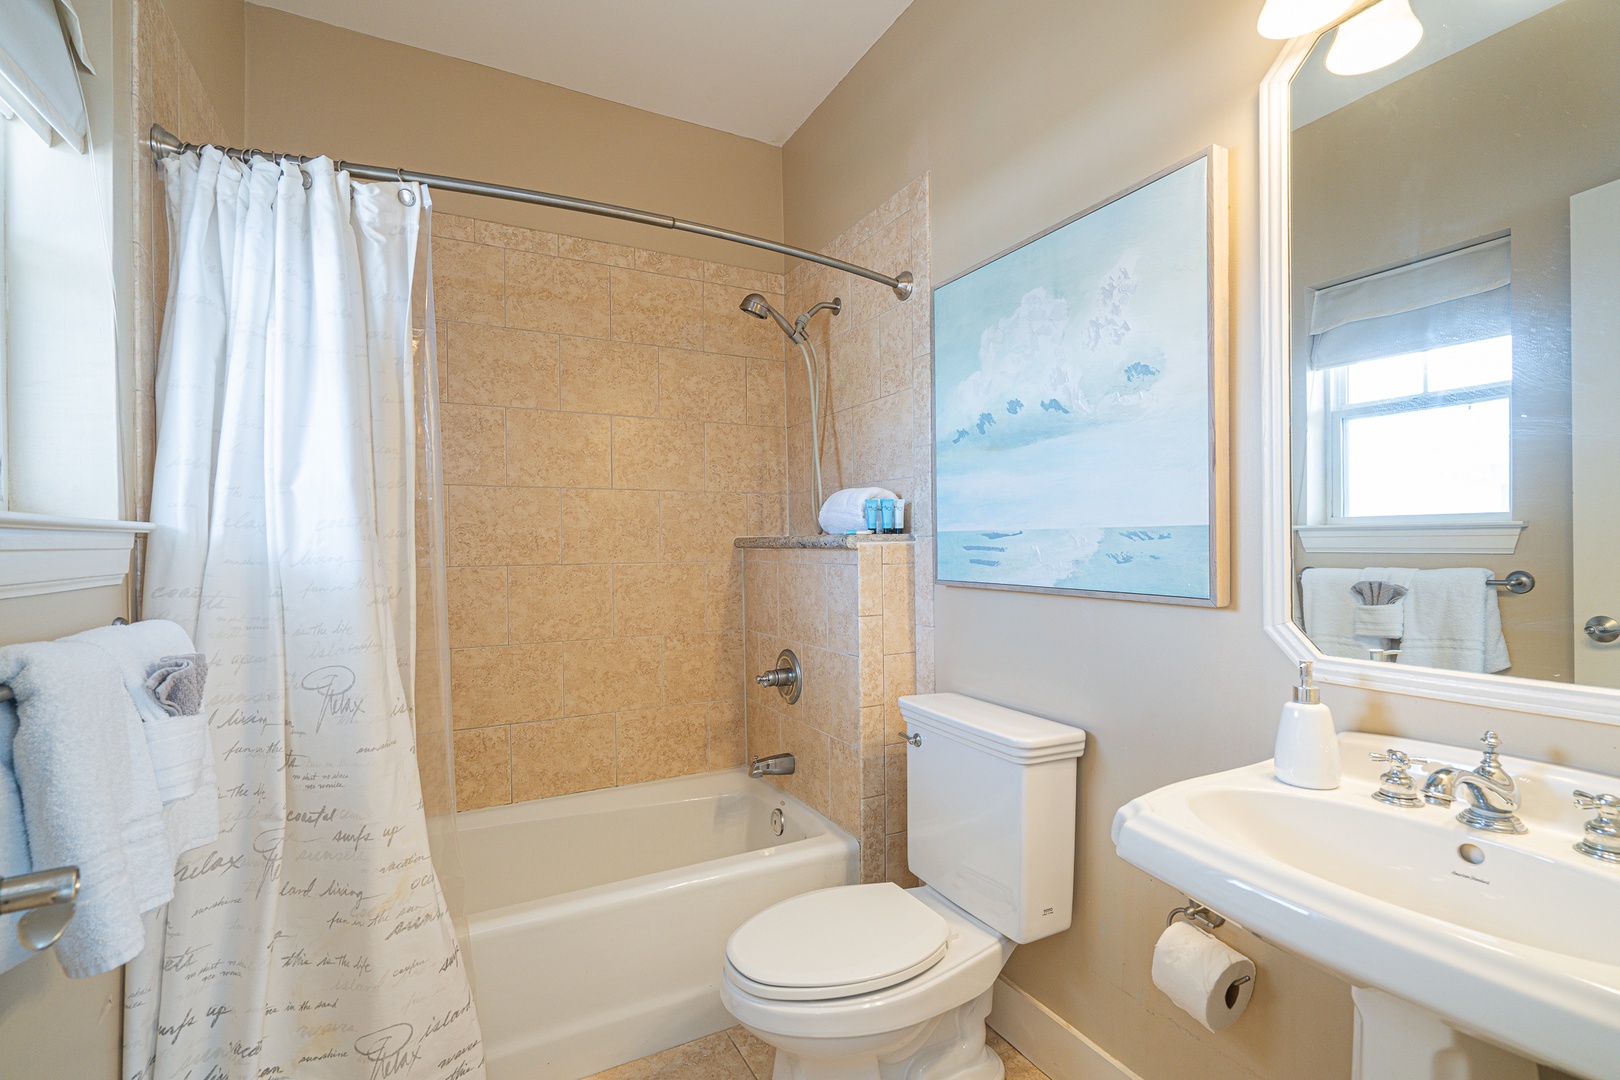 The 2nd floor king ensuite includes a pedestal sink & shower/tub combo